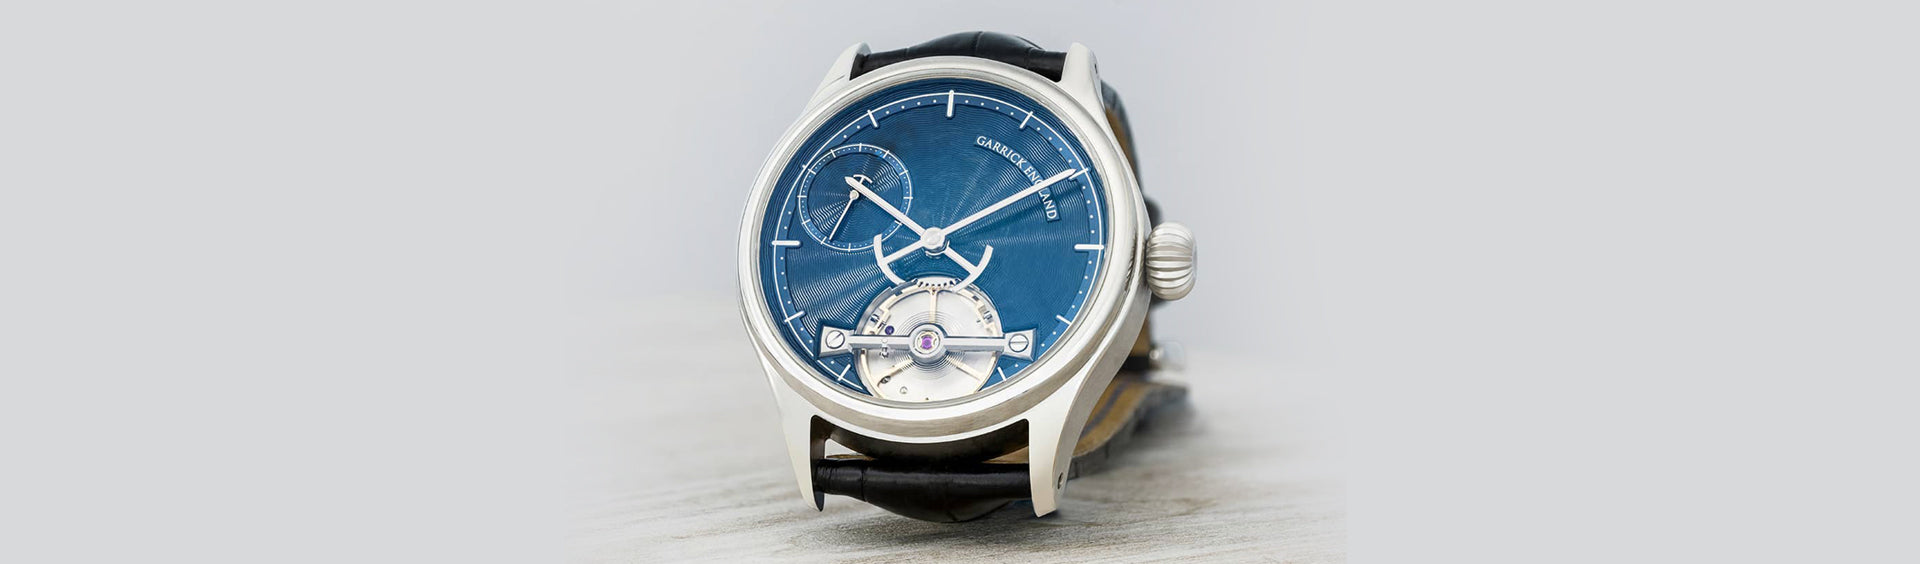 Portsmouth watch with guilloche dial and free-sprung balance by Garrick Watchmakers